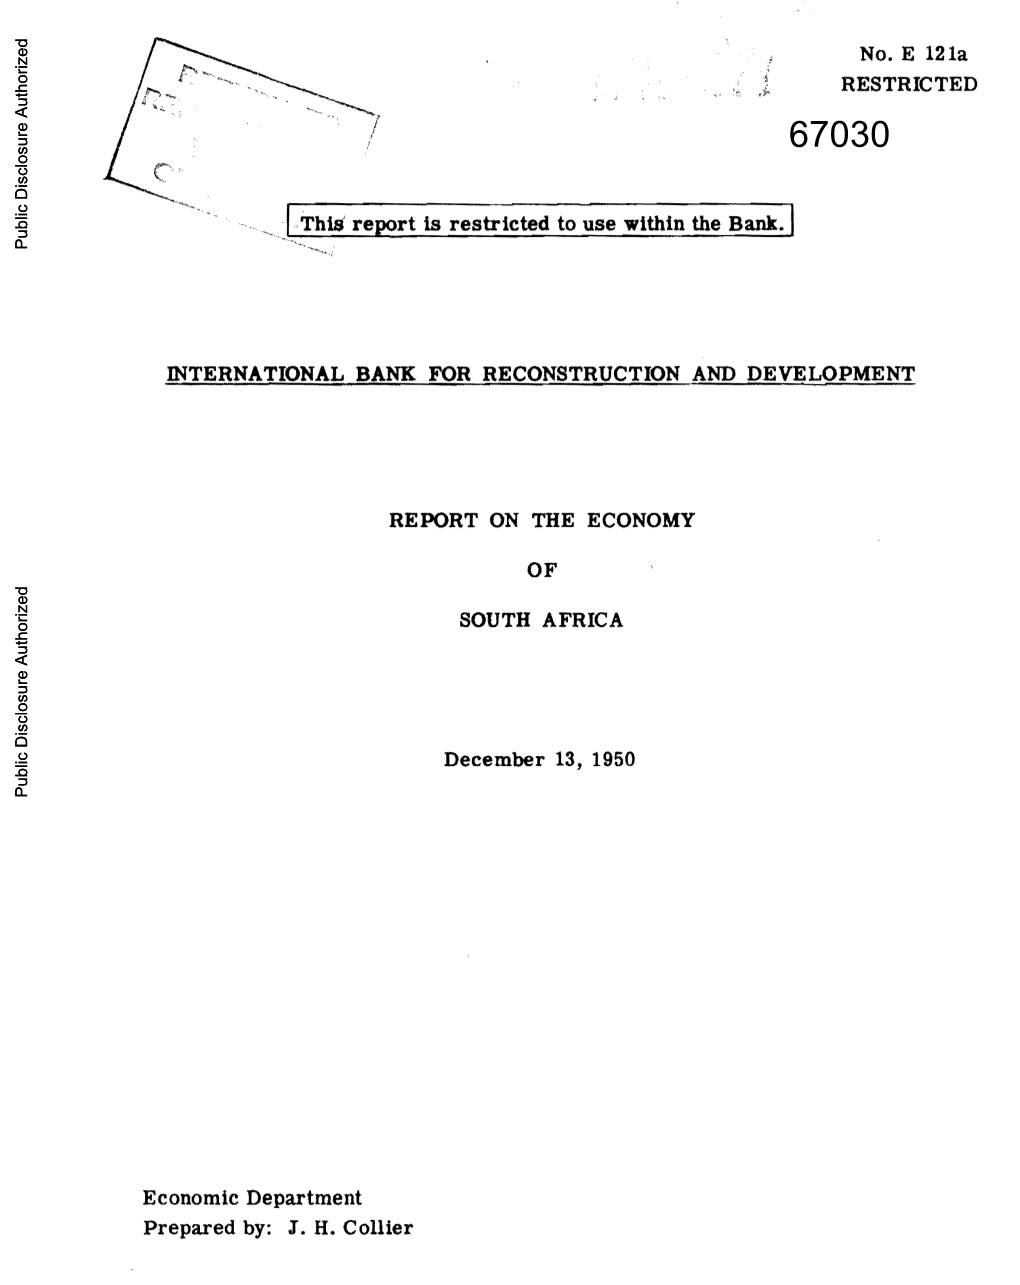 Union of South Africa ••••••• 27 Unroll of SOUTH Afaica Basic Statistics